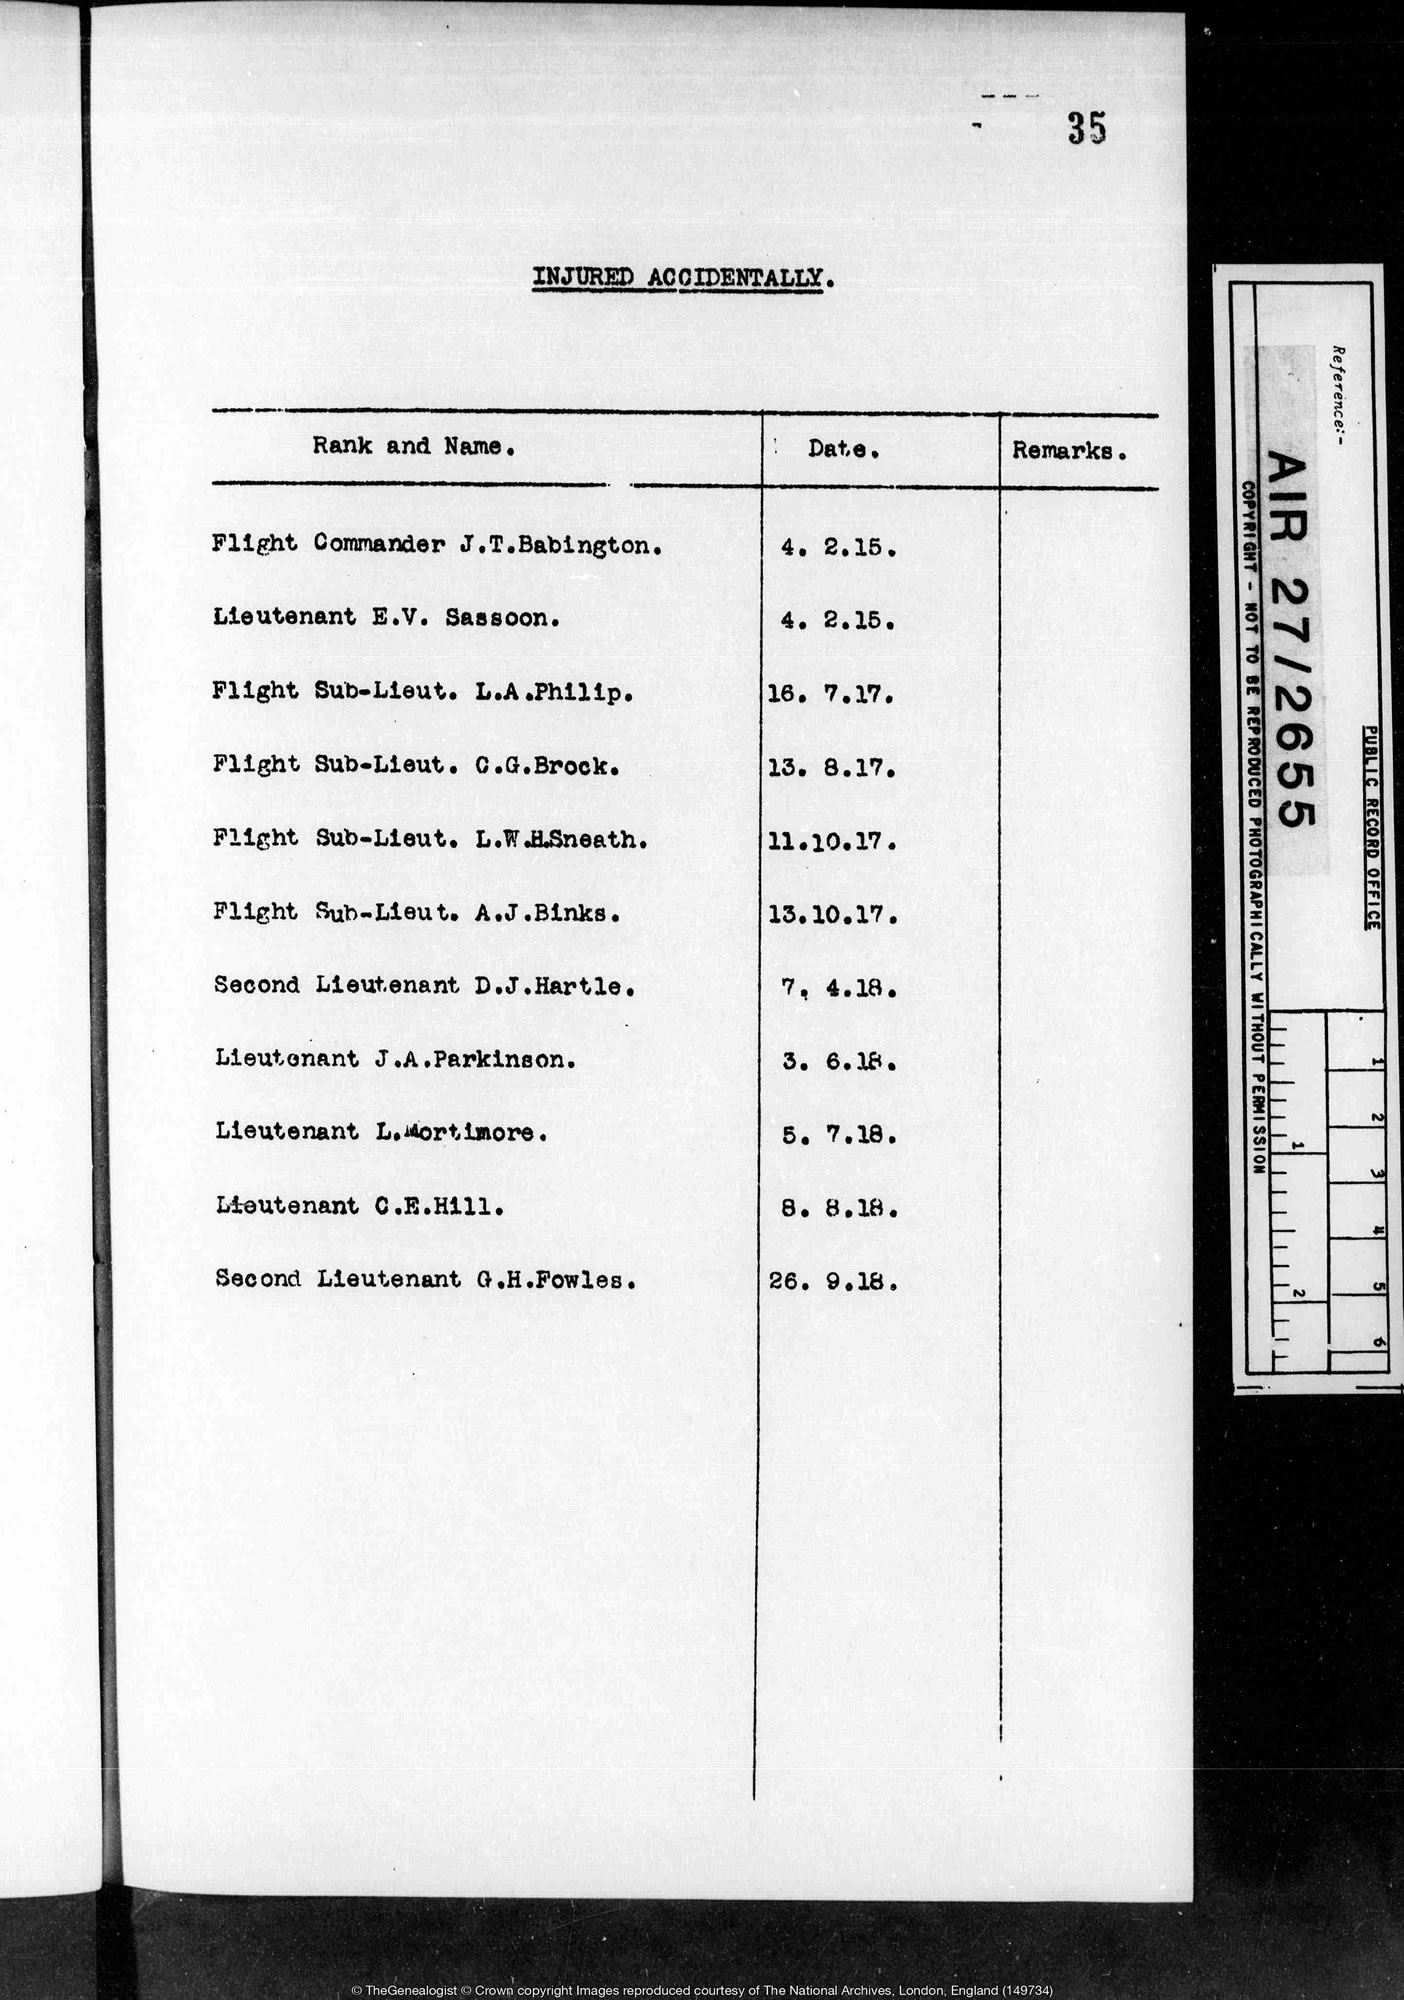 An early example of an Air 27 Operations Record Books (ORBs) in which Lieutenant E.V. Sassoon is recorded as injured accidentally